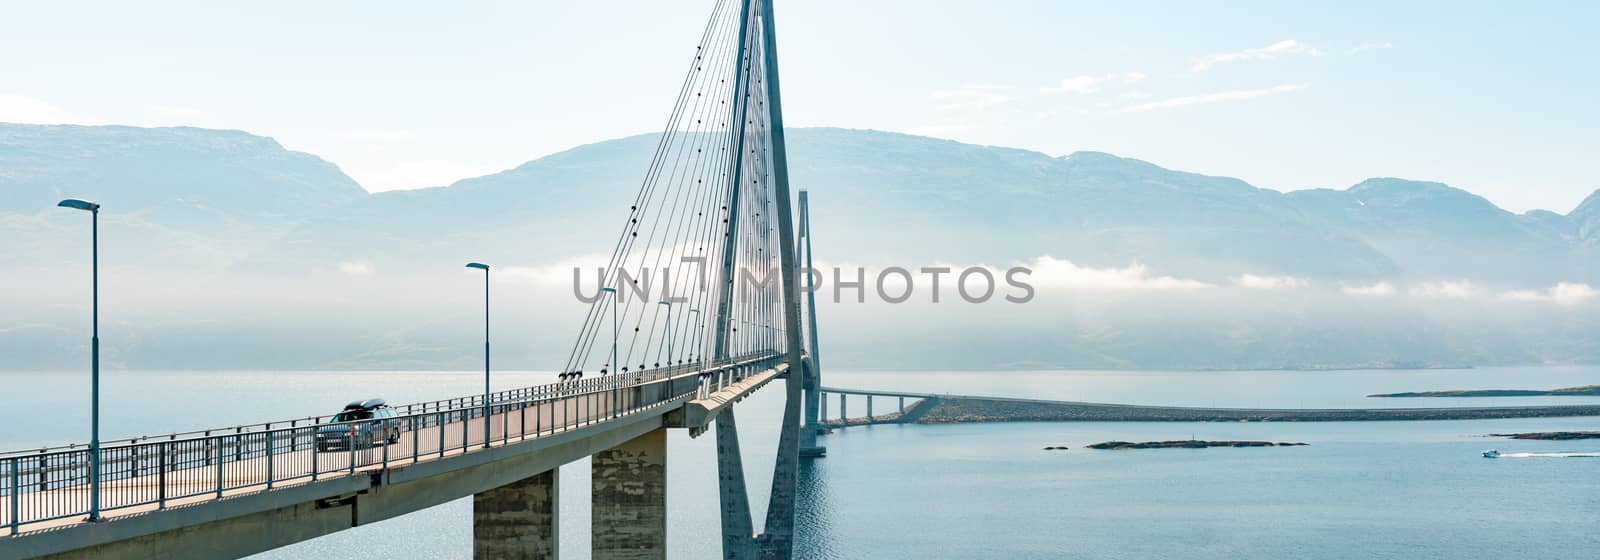 Panorama of car on road in Norway, Europe. Auto travel through scandinavia. Blue cloudy sky, lake and bridge in background.